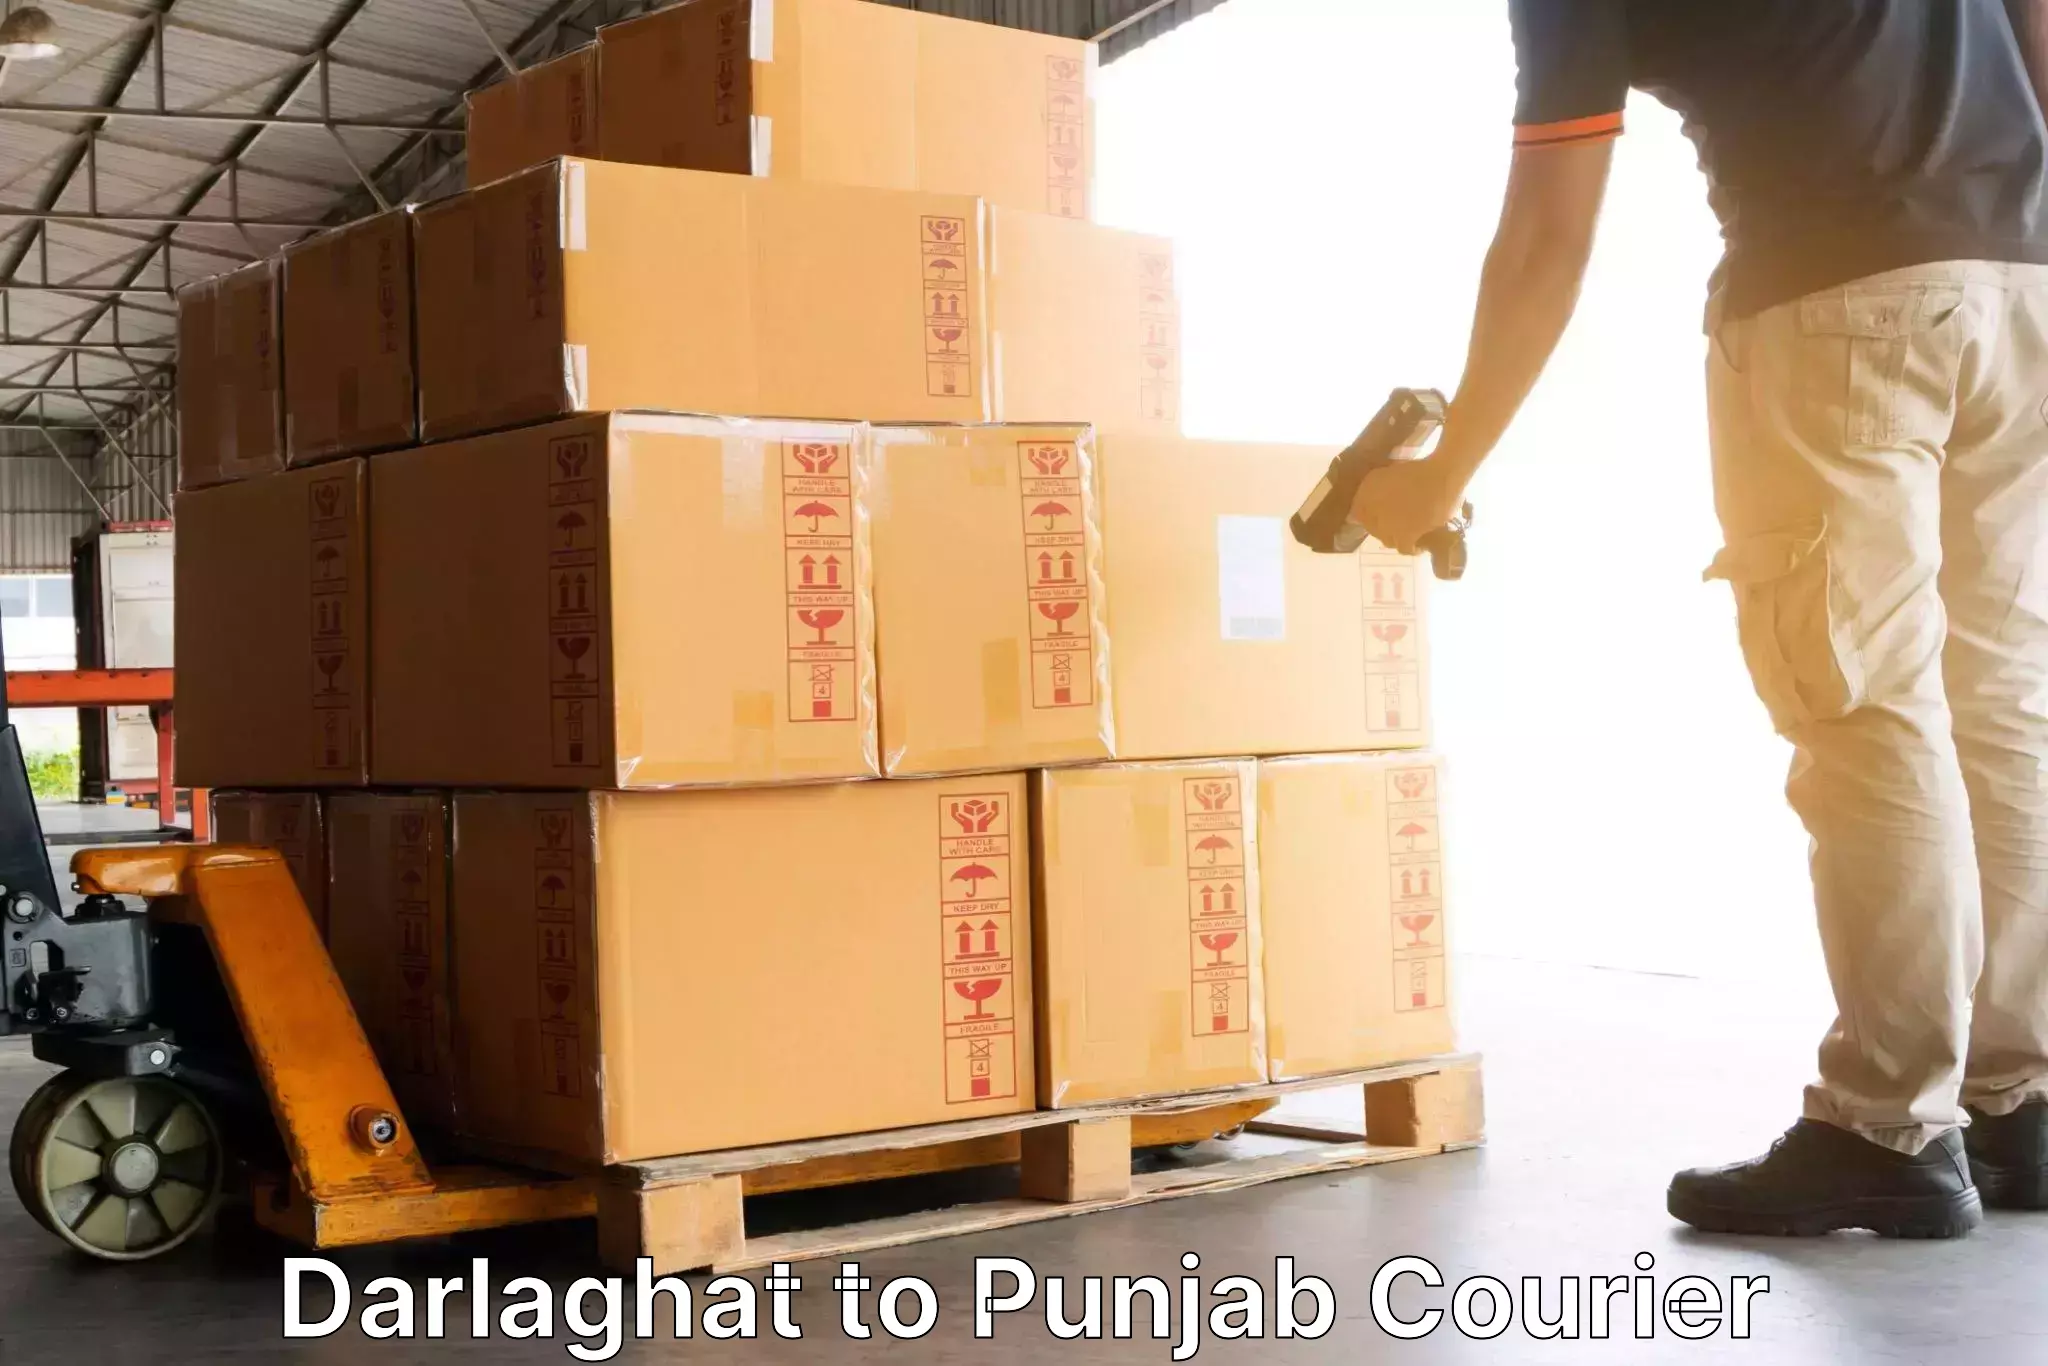 Flexible delivery schedules Darlaghat to Bhadaur